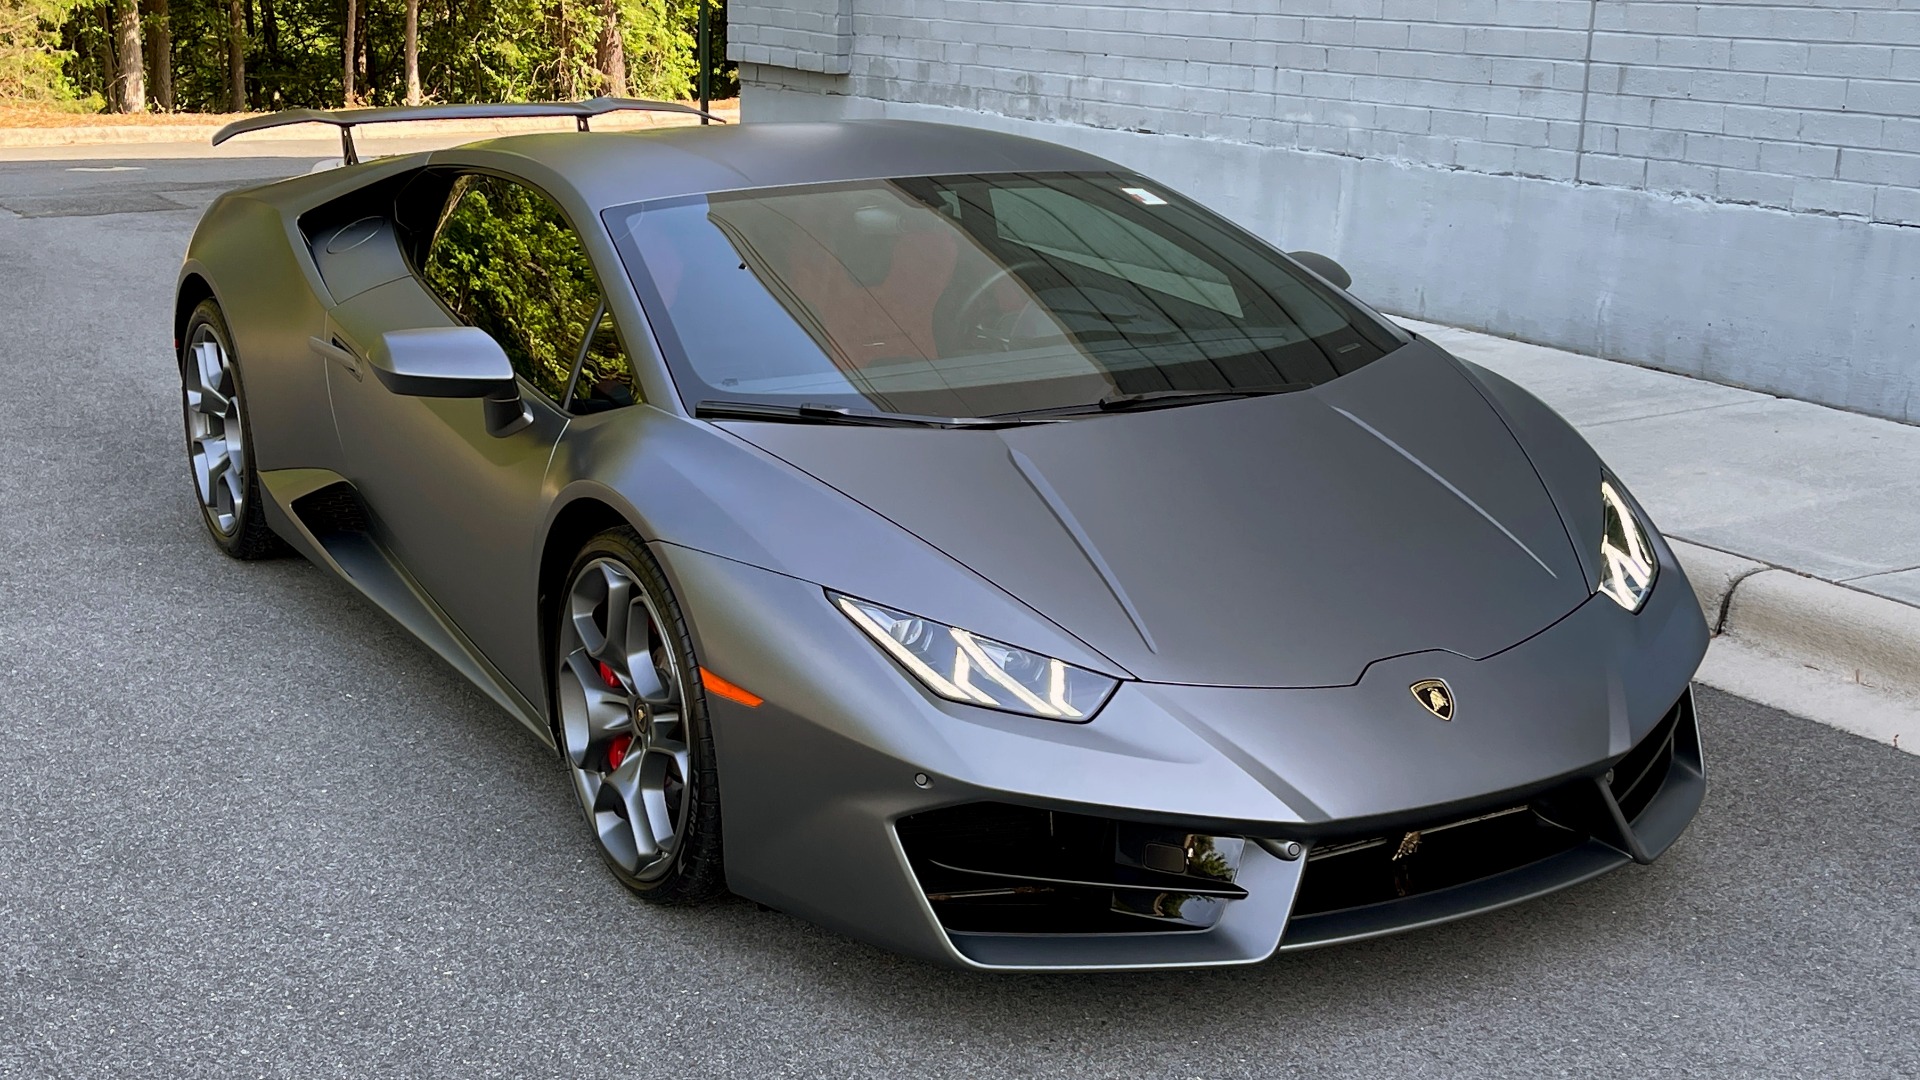 Used 2019 Lamborghini HURACAN LP 580-2 / 5.2L V10 (571HP) / 7-SPD AUTO / RWD / REARVIEW for sale $254,999 at Formula Imports in Charlotte NC 28227 7